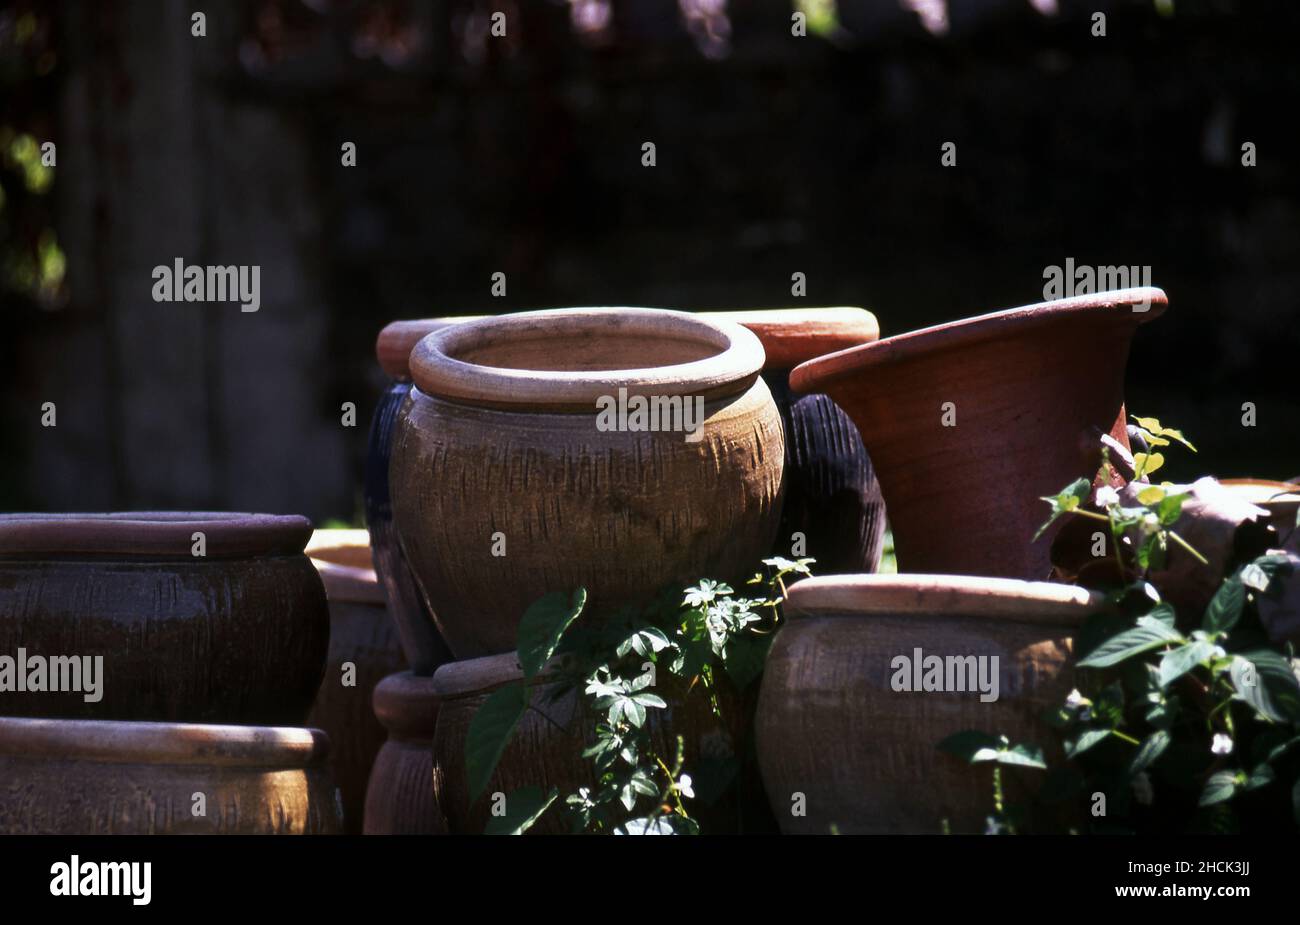 CLAY POTS FOR SALE Stock Photo